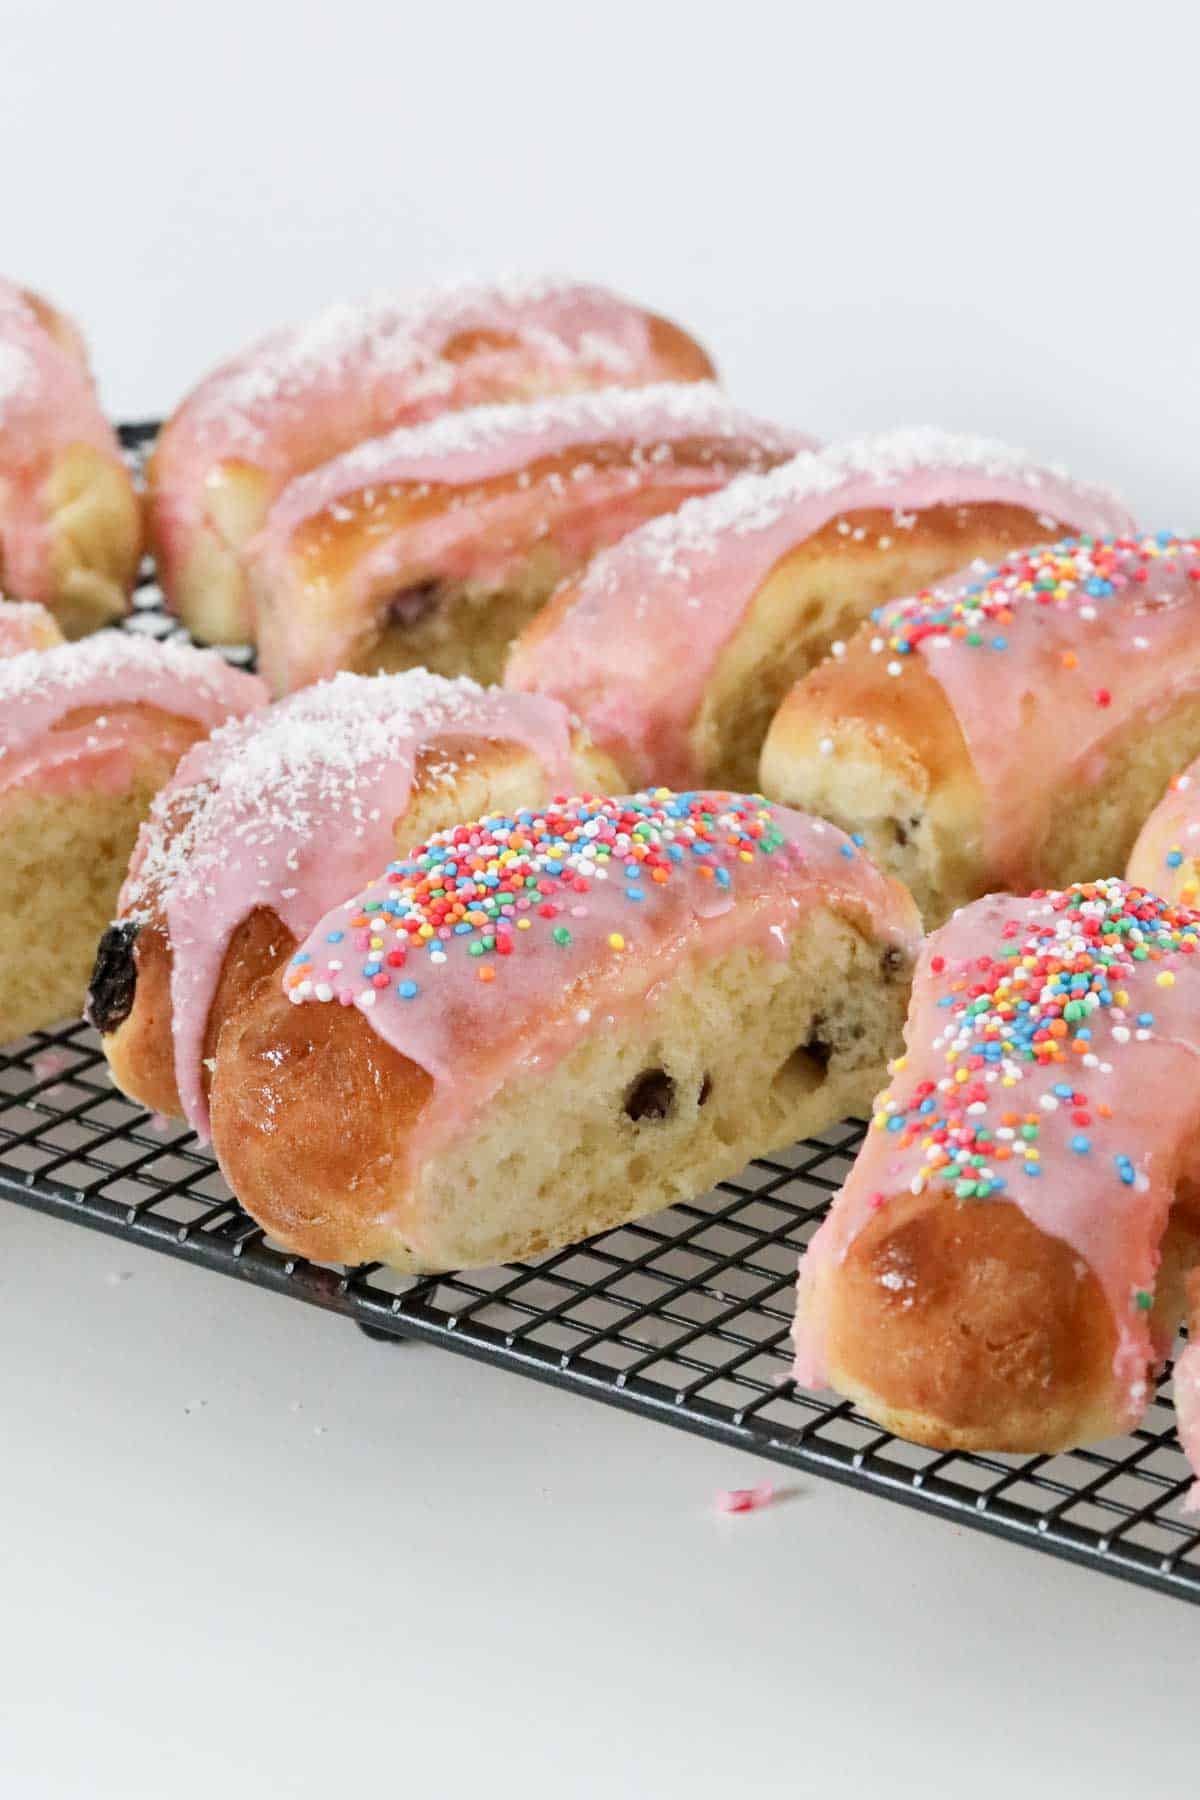 side view of some iced finger buns to show the fruit studded dough.